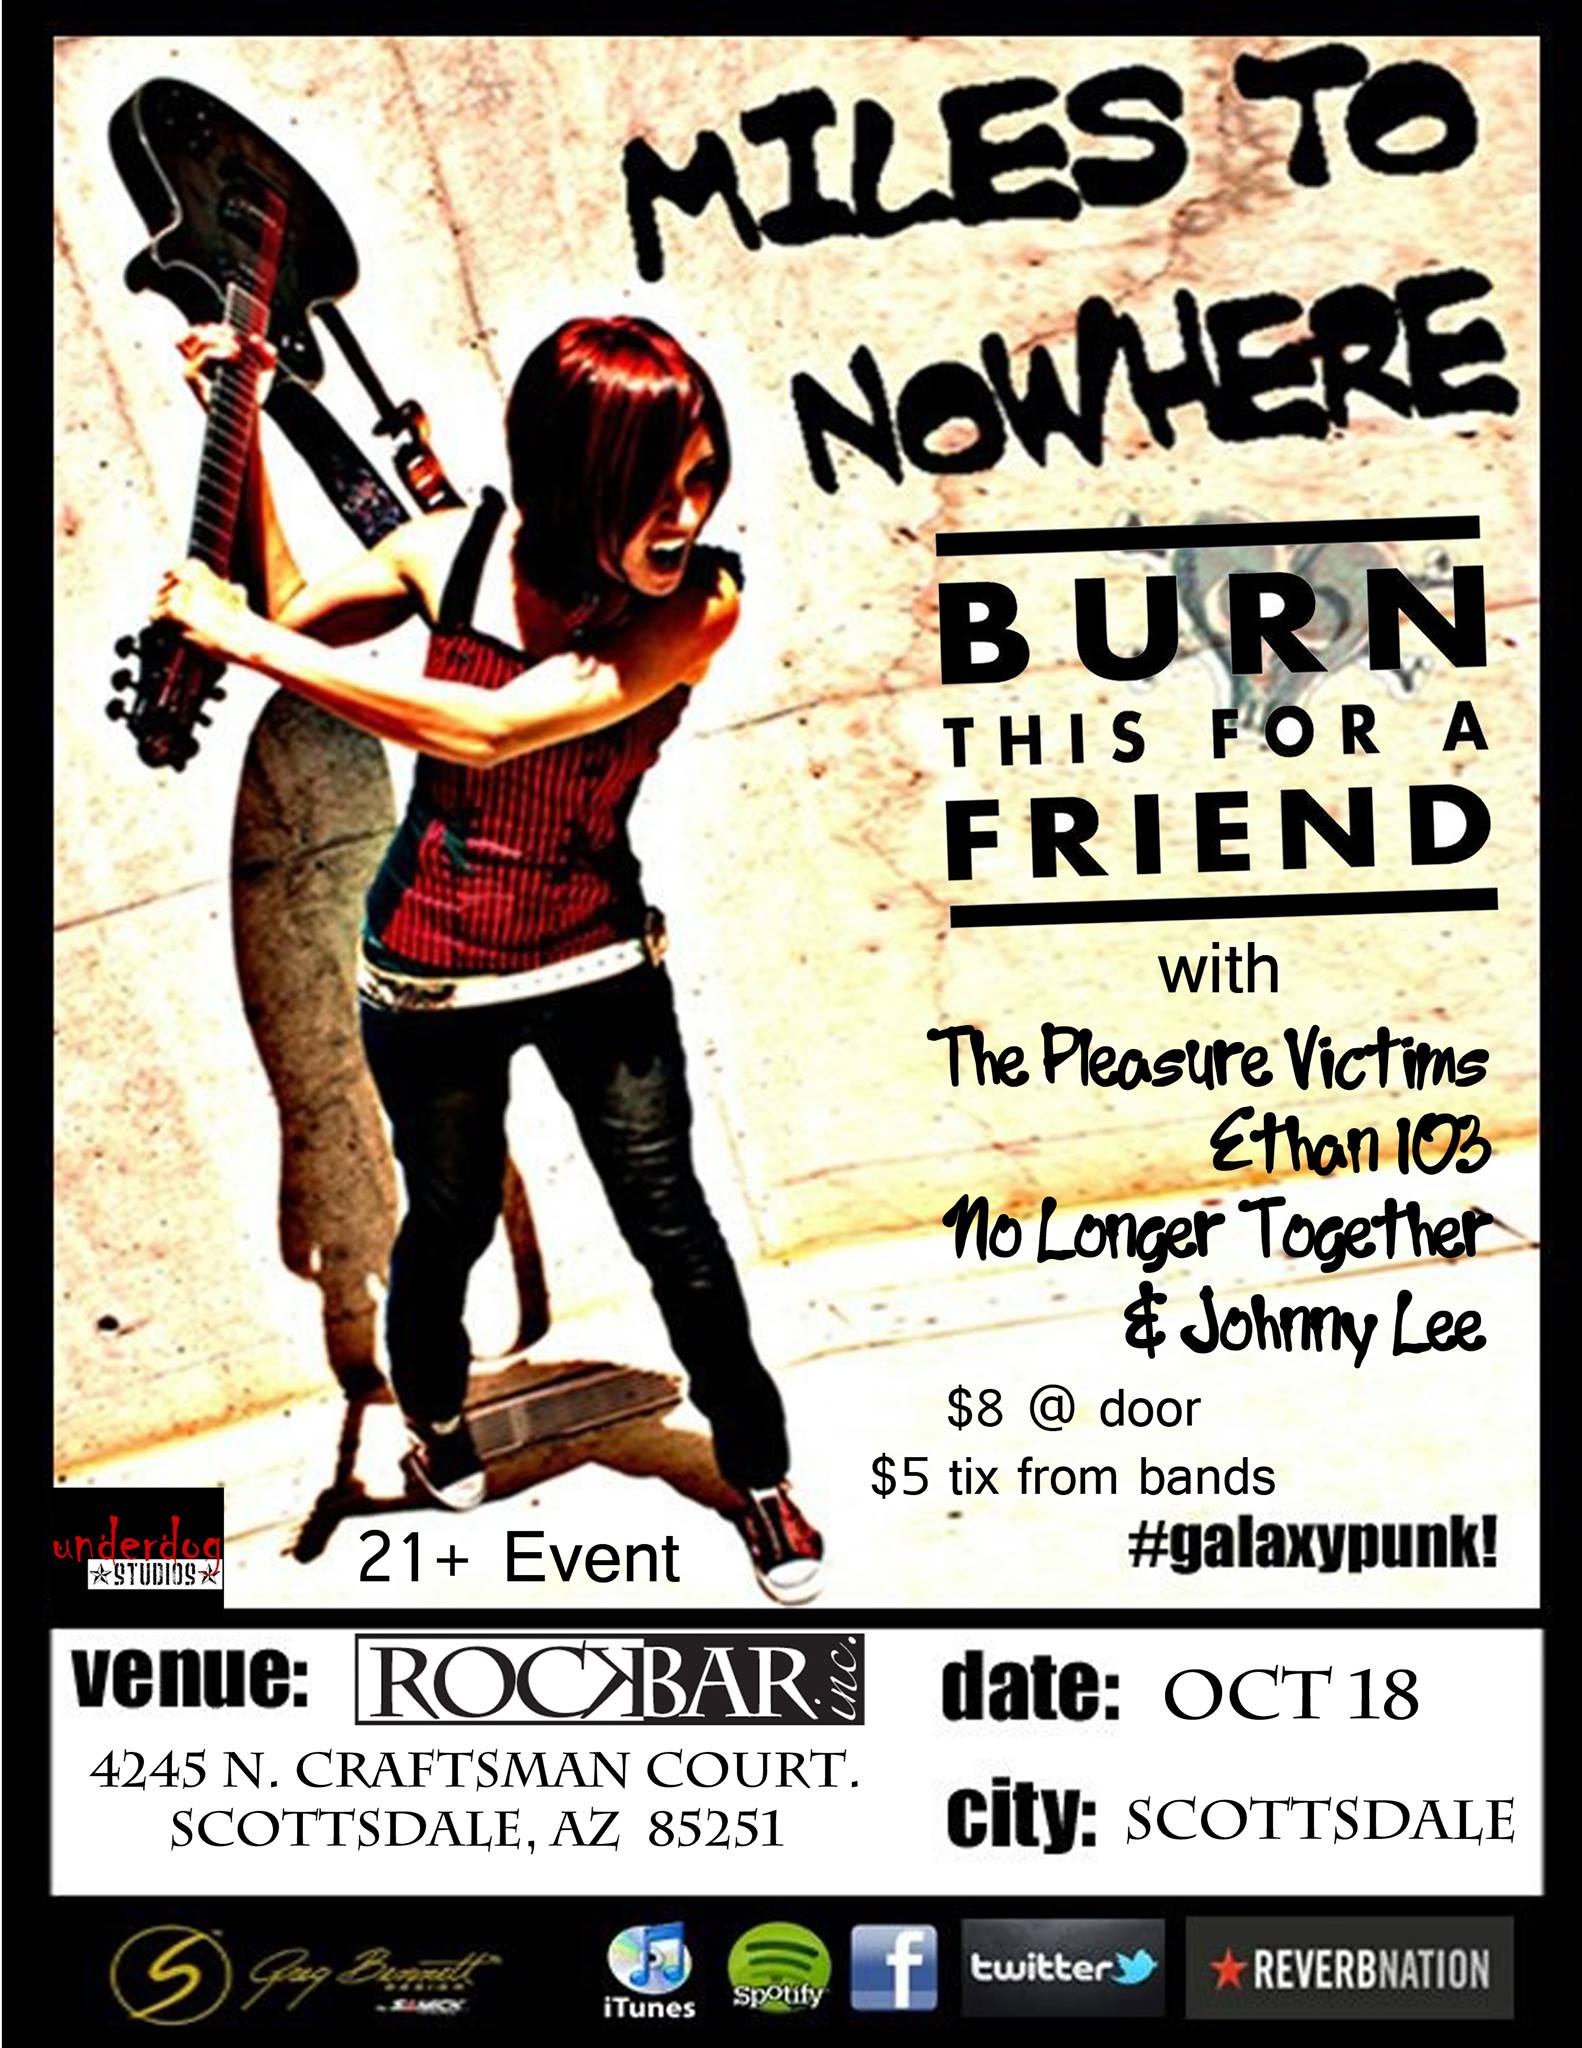 Rockbar – Miles to Nowhere, Burn This For A Friend, The Pleasure Victims, and more!